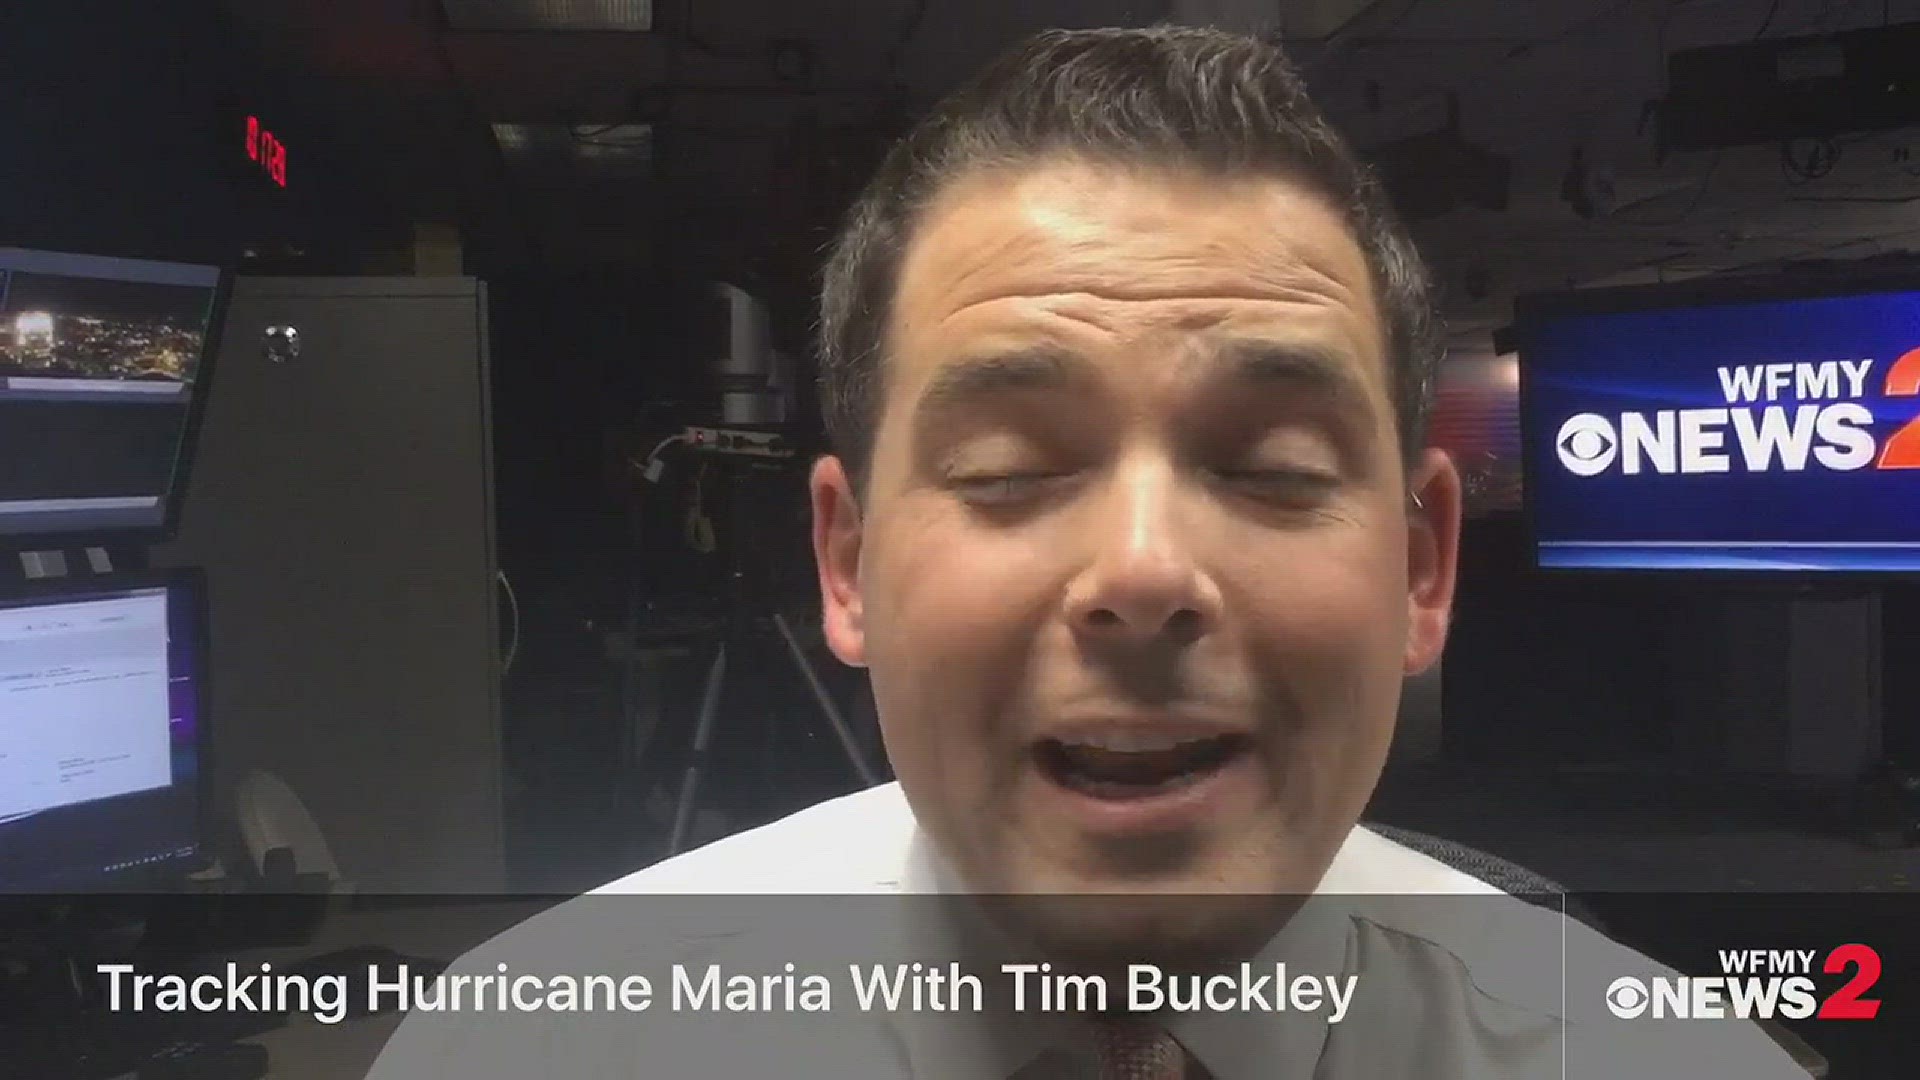 Tracking Hurricane Maria With Tim Buckley